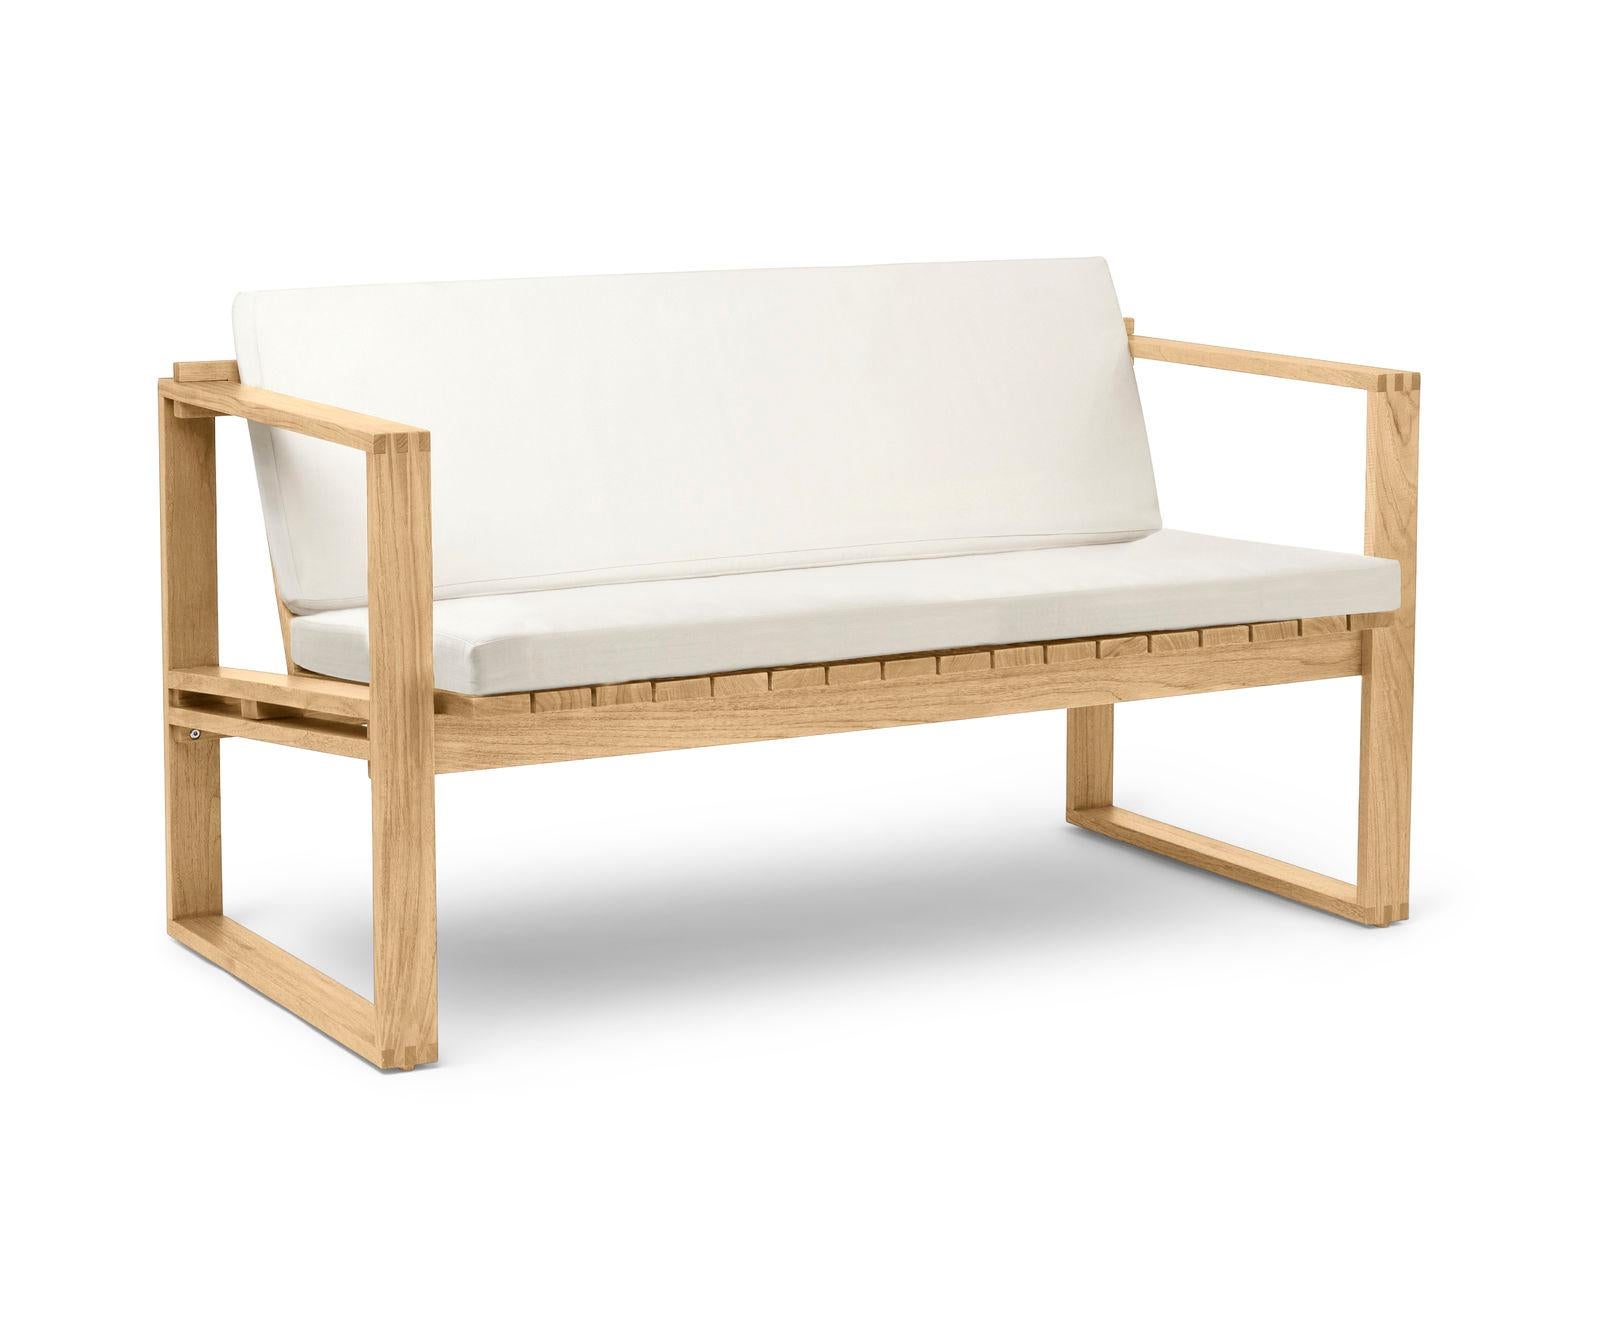 In 1959, Danish architect Bodil Kjær launched her Indoor-Outdoor series, which included the supremely comfortable BK12 lounge sofa. Crafted from solid teak with a slatted seat and back, the sofa displays the same geometric sensibility that underpins